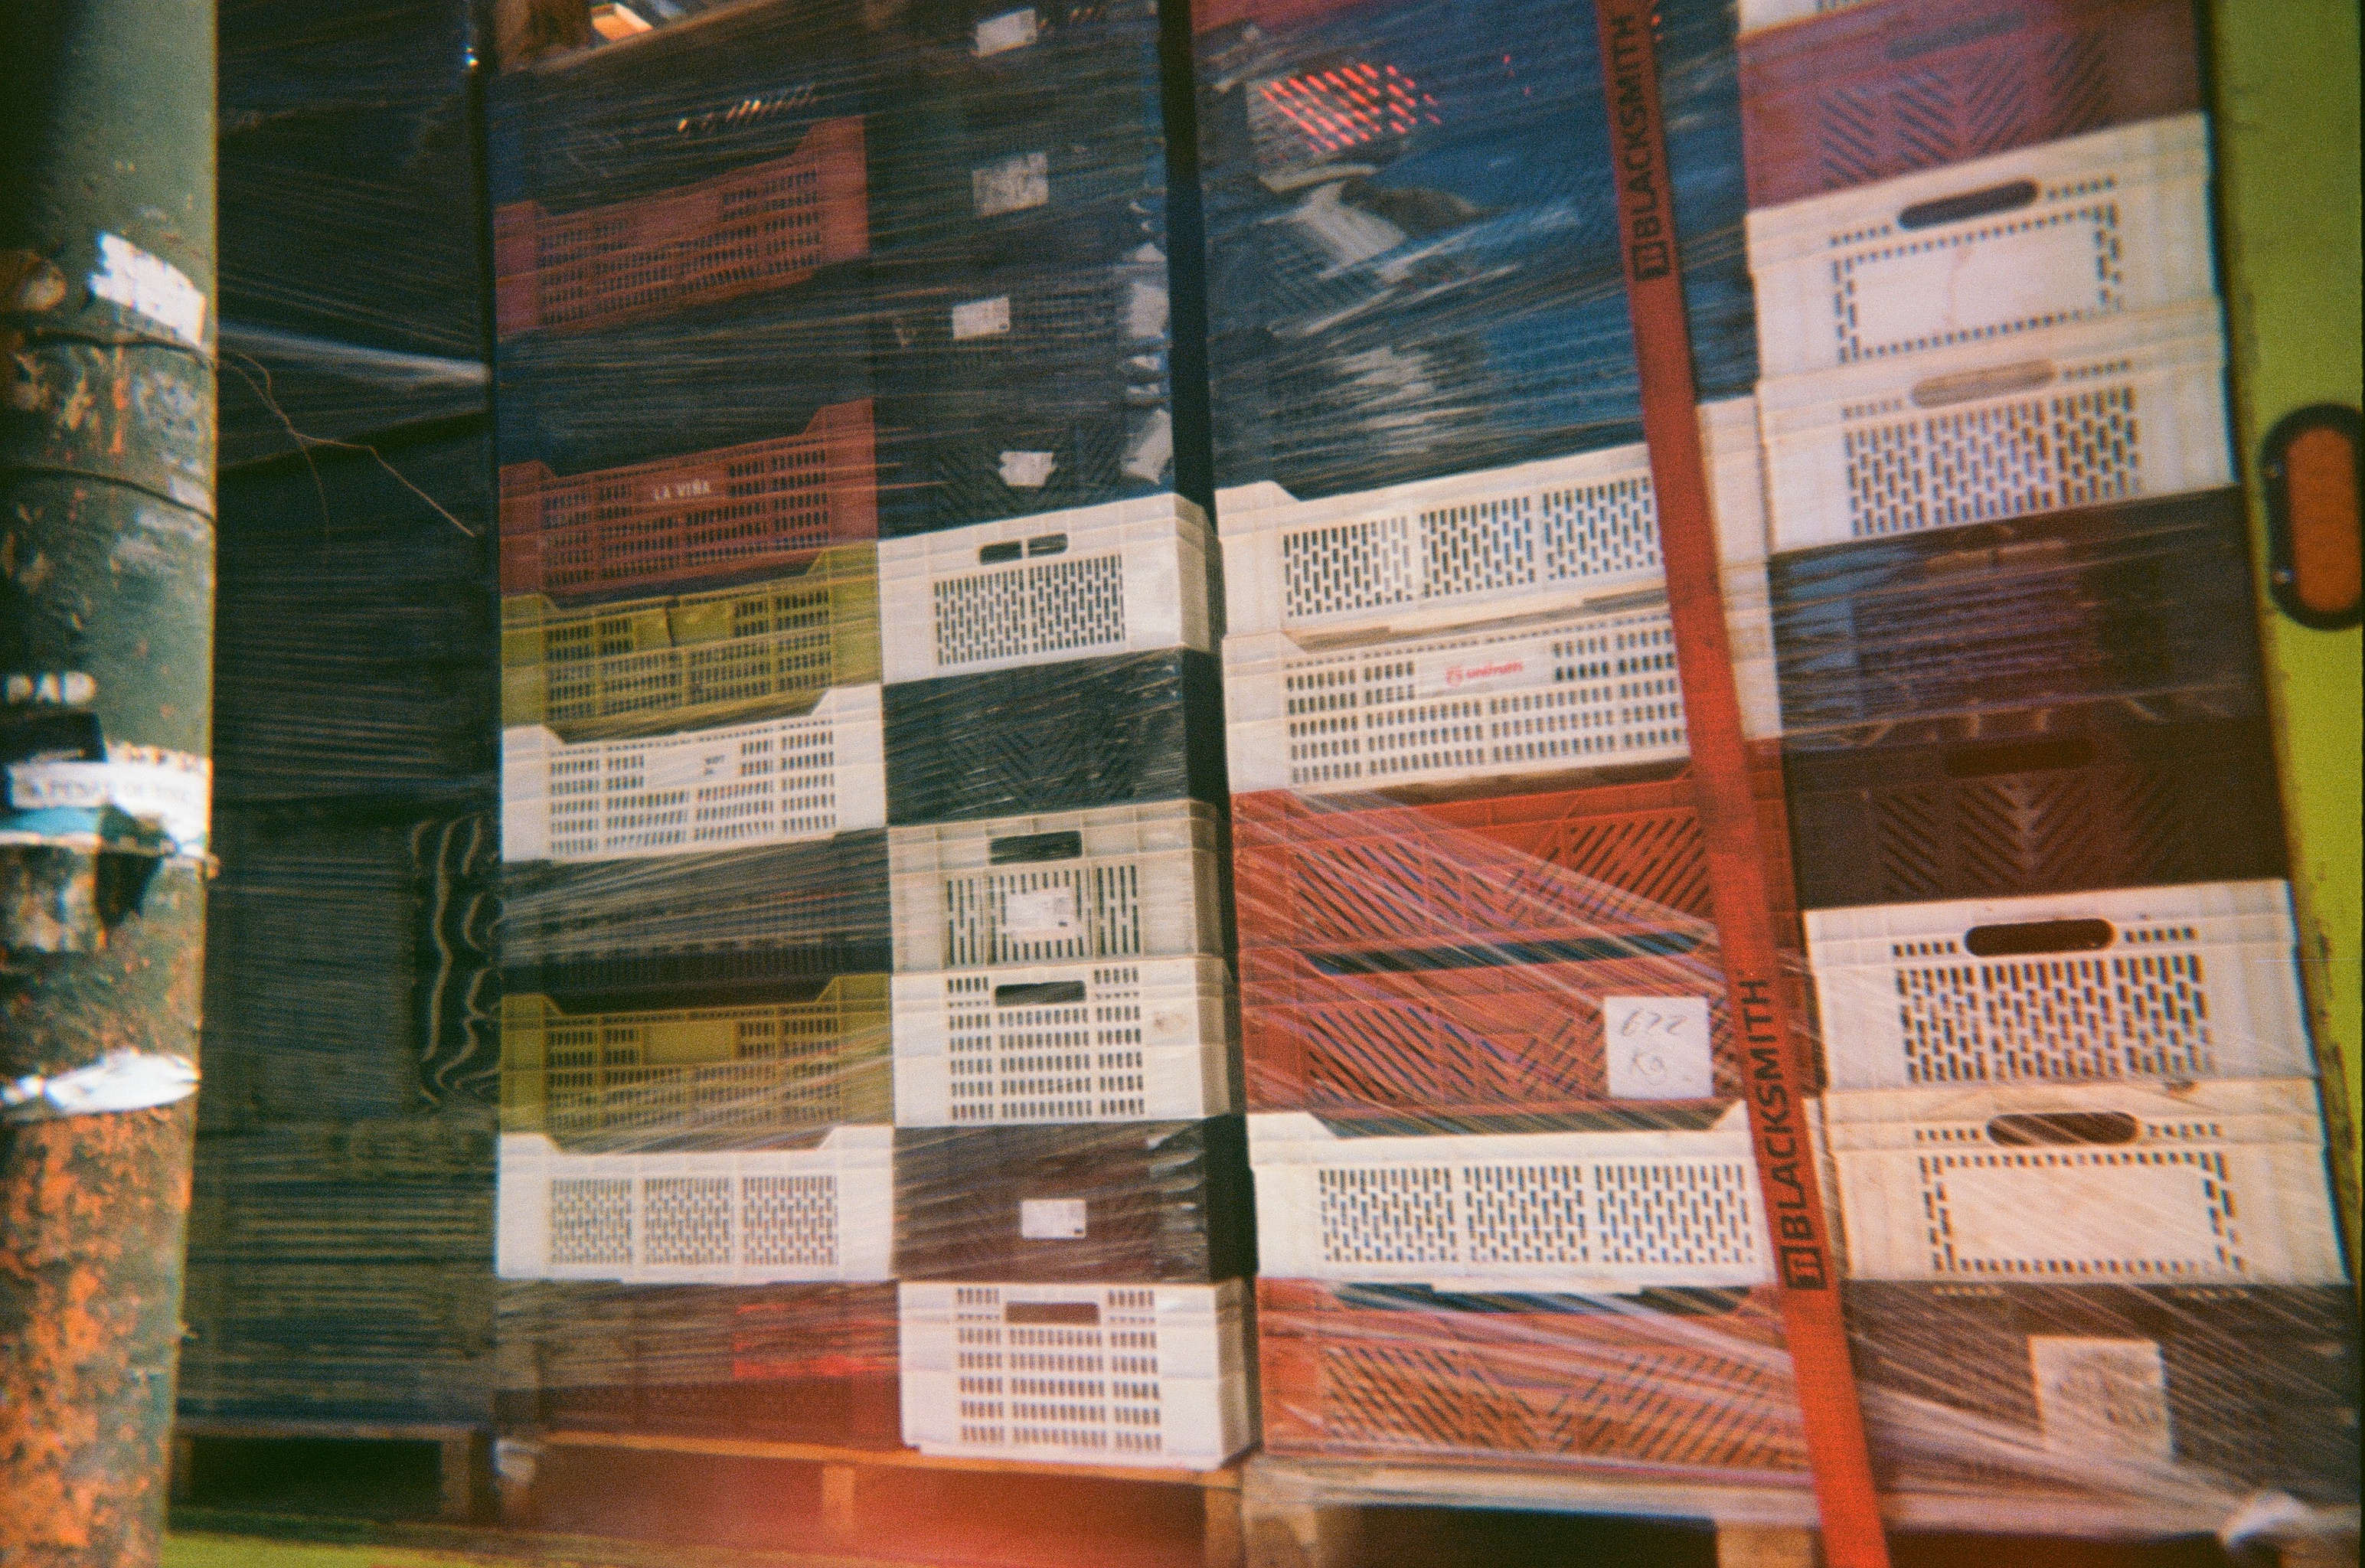 crates in the back of truck